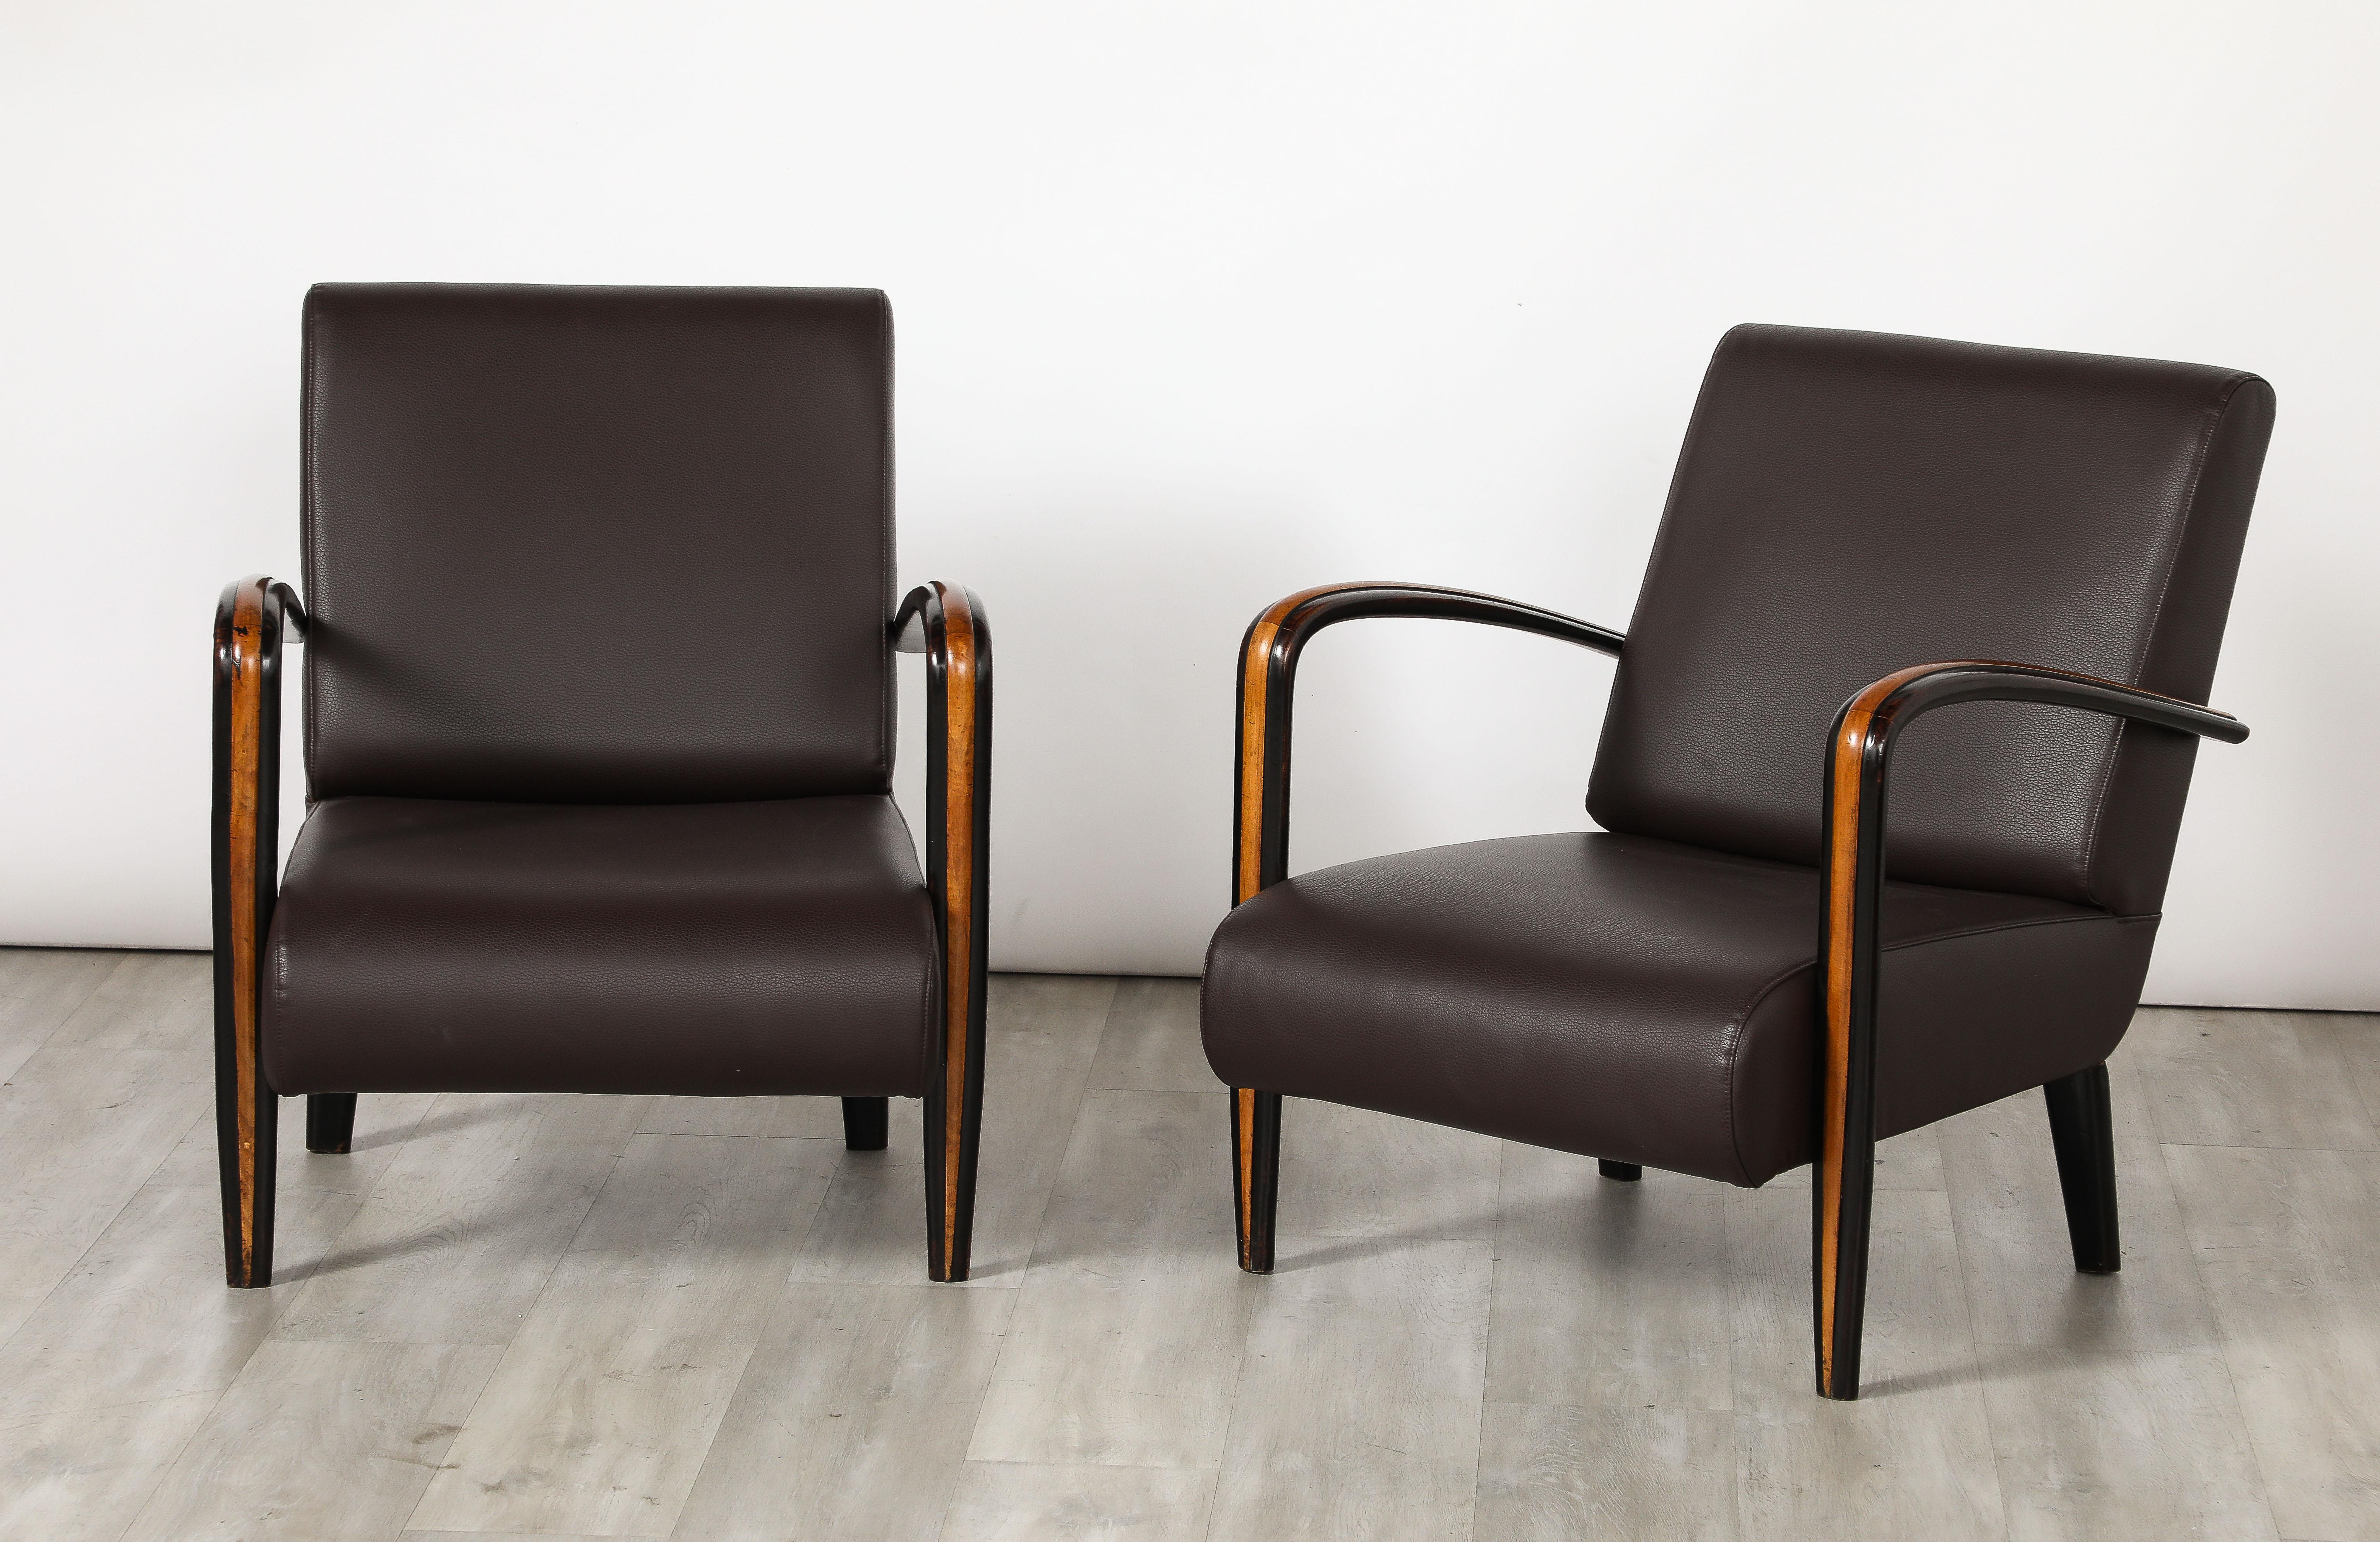 Pair of Italian Modernist Lounge Chairs, Italy, circa 1940 In Good Condition For Sale In New York, NY